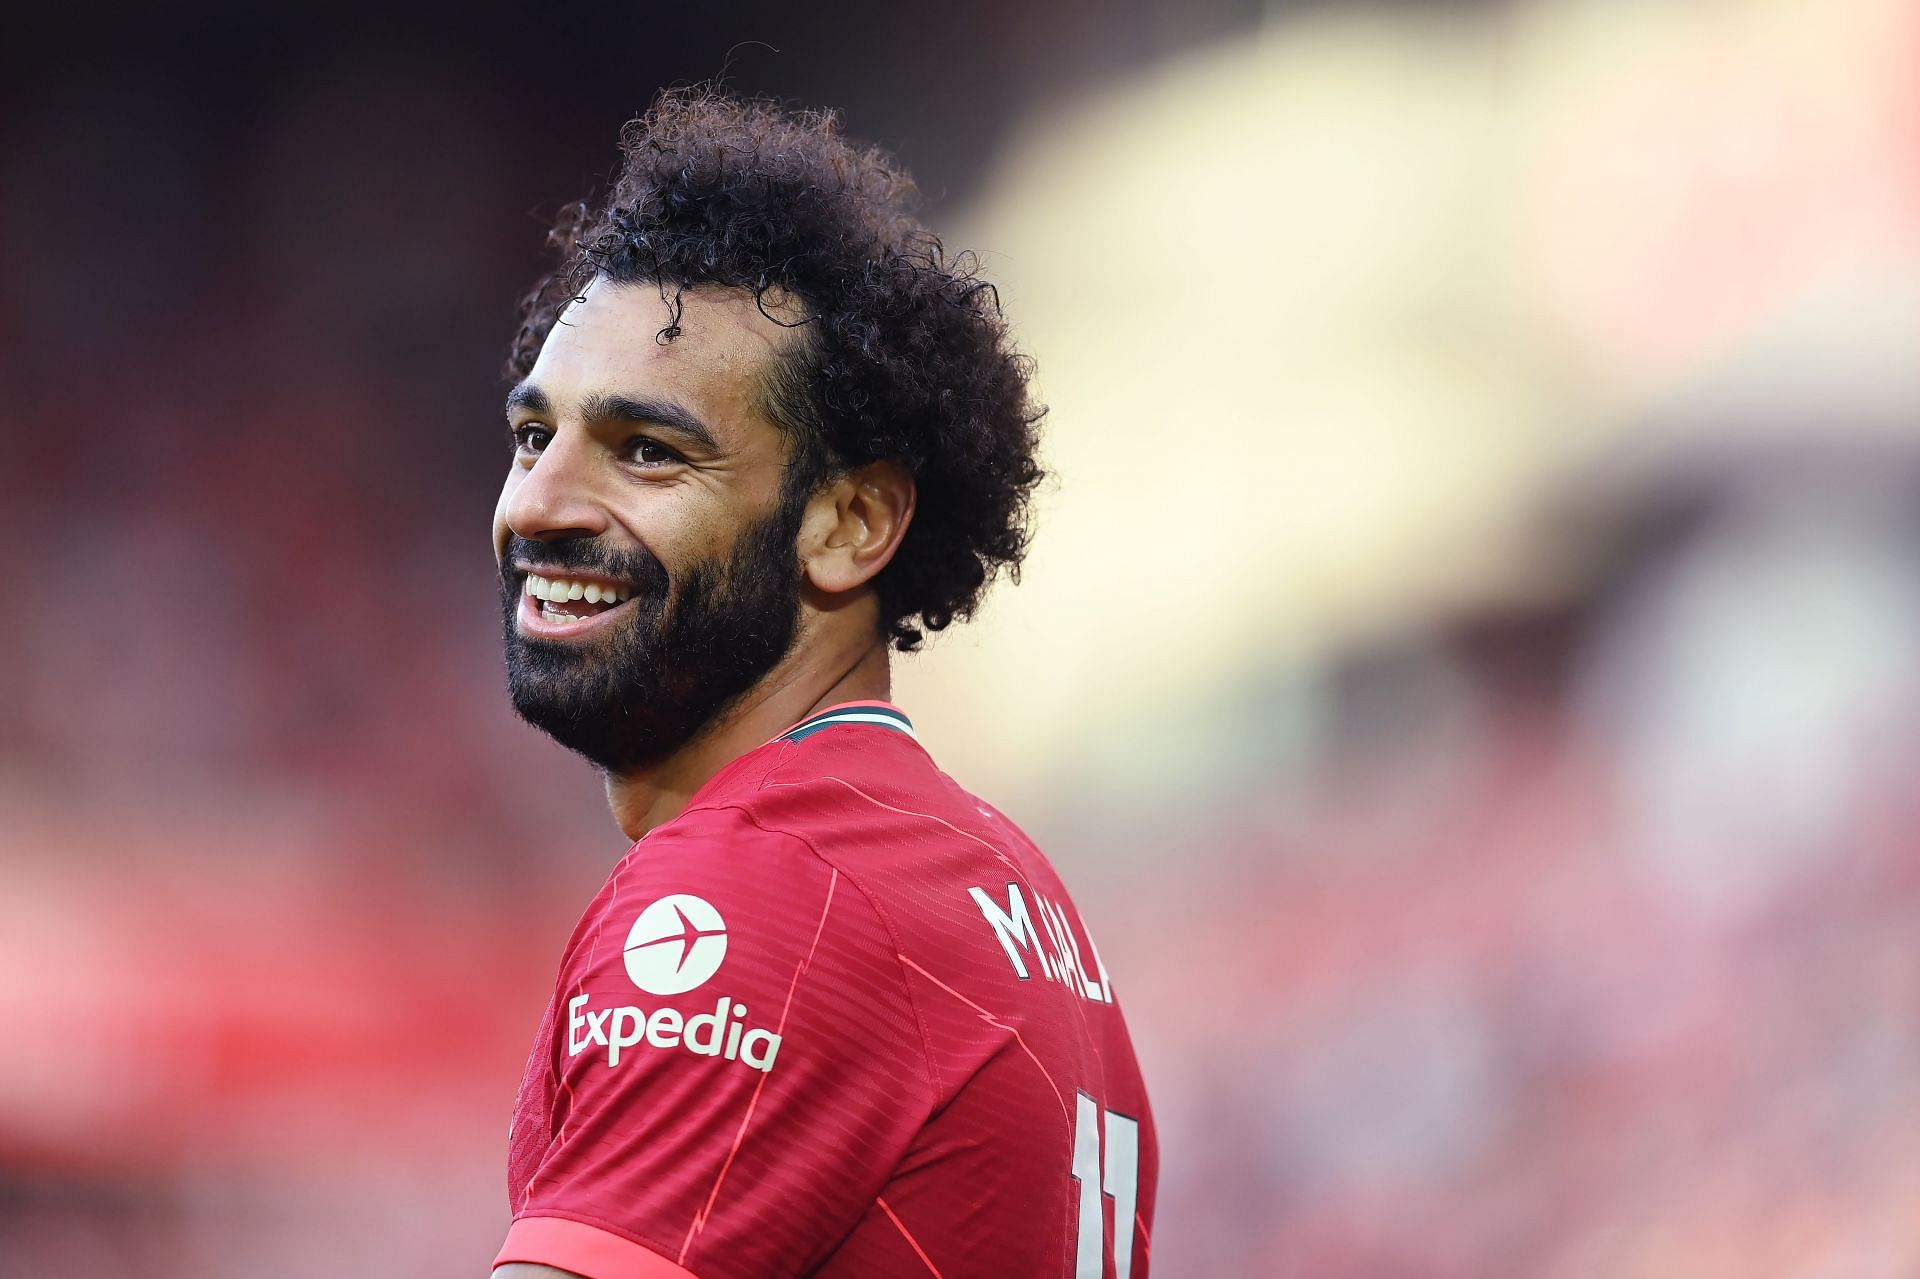 Mohamed Salah will enter the final 12 months of his contract at Liverpool on July 1